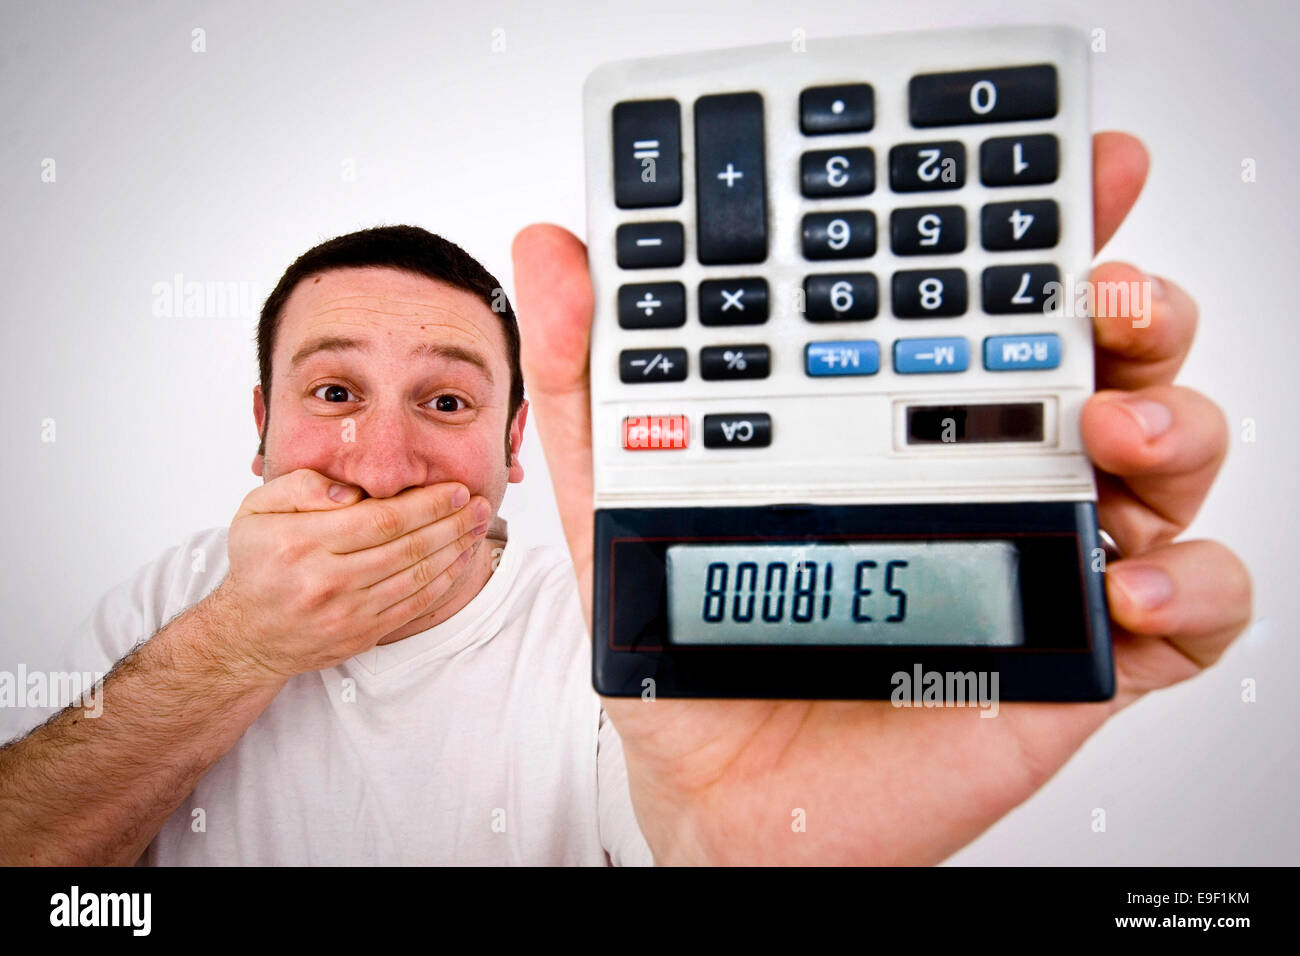 a man holds up a calculator upside down, with the words boobies